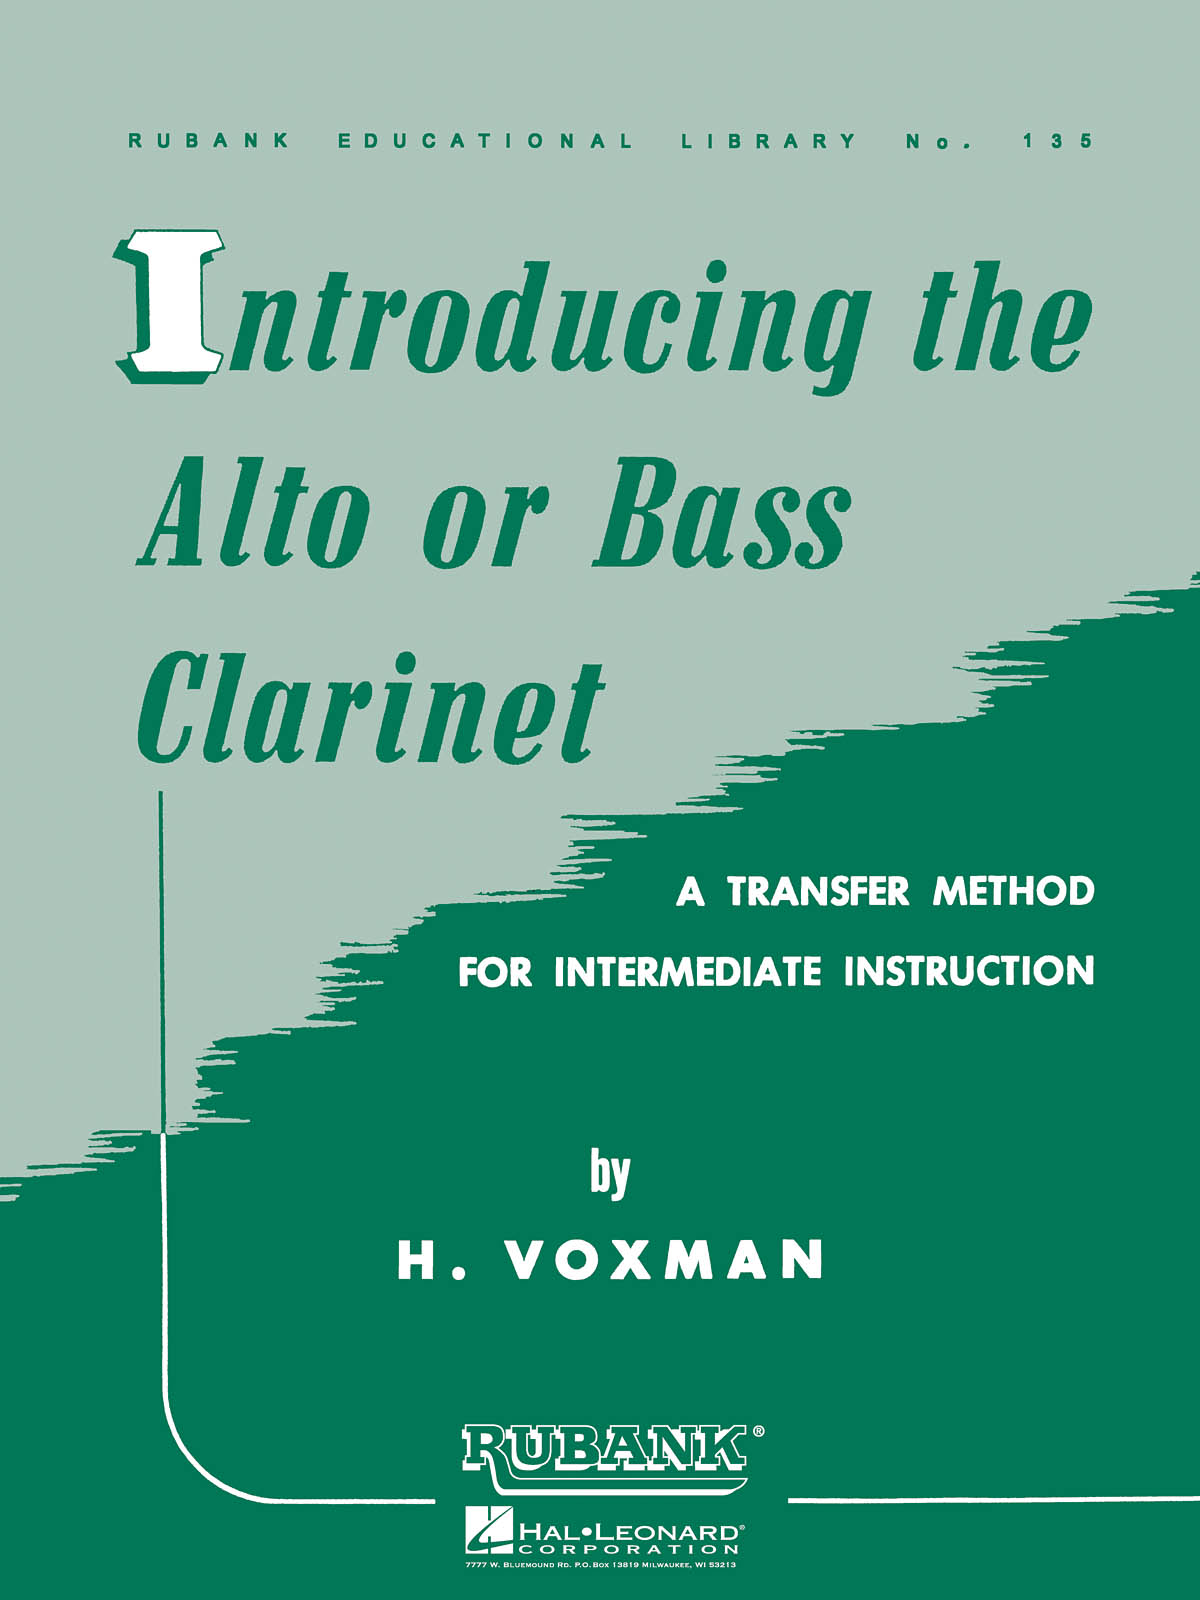 Himmie Voxman: Introducing the Alto or bass clarinet